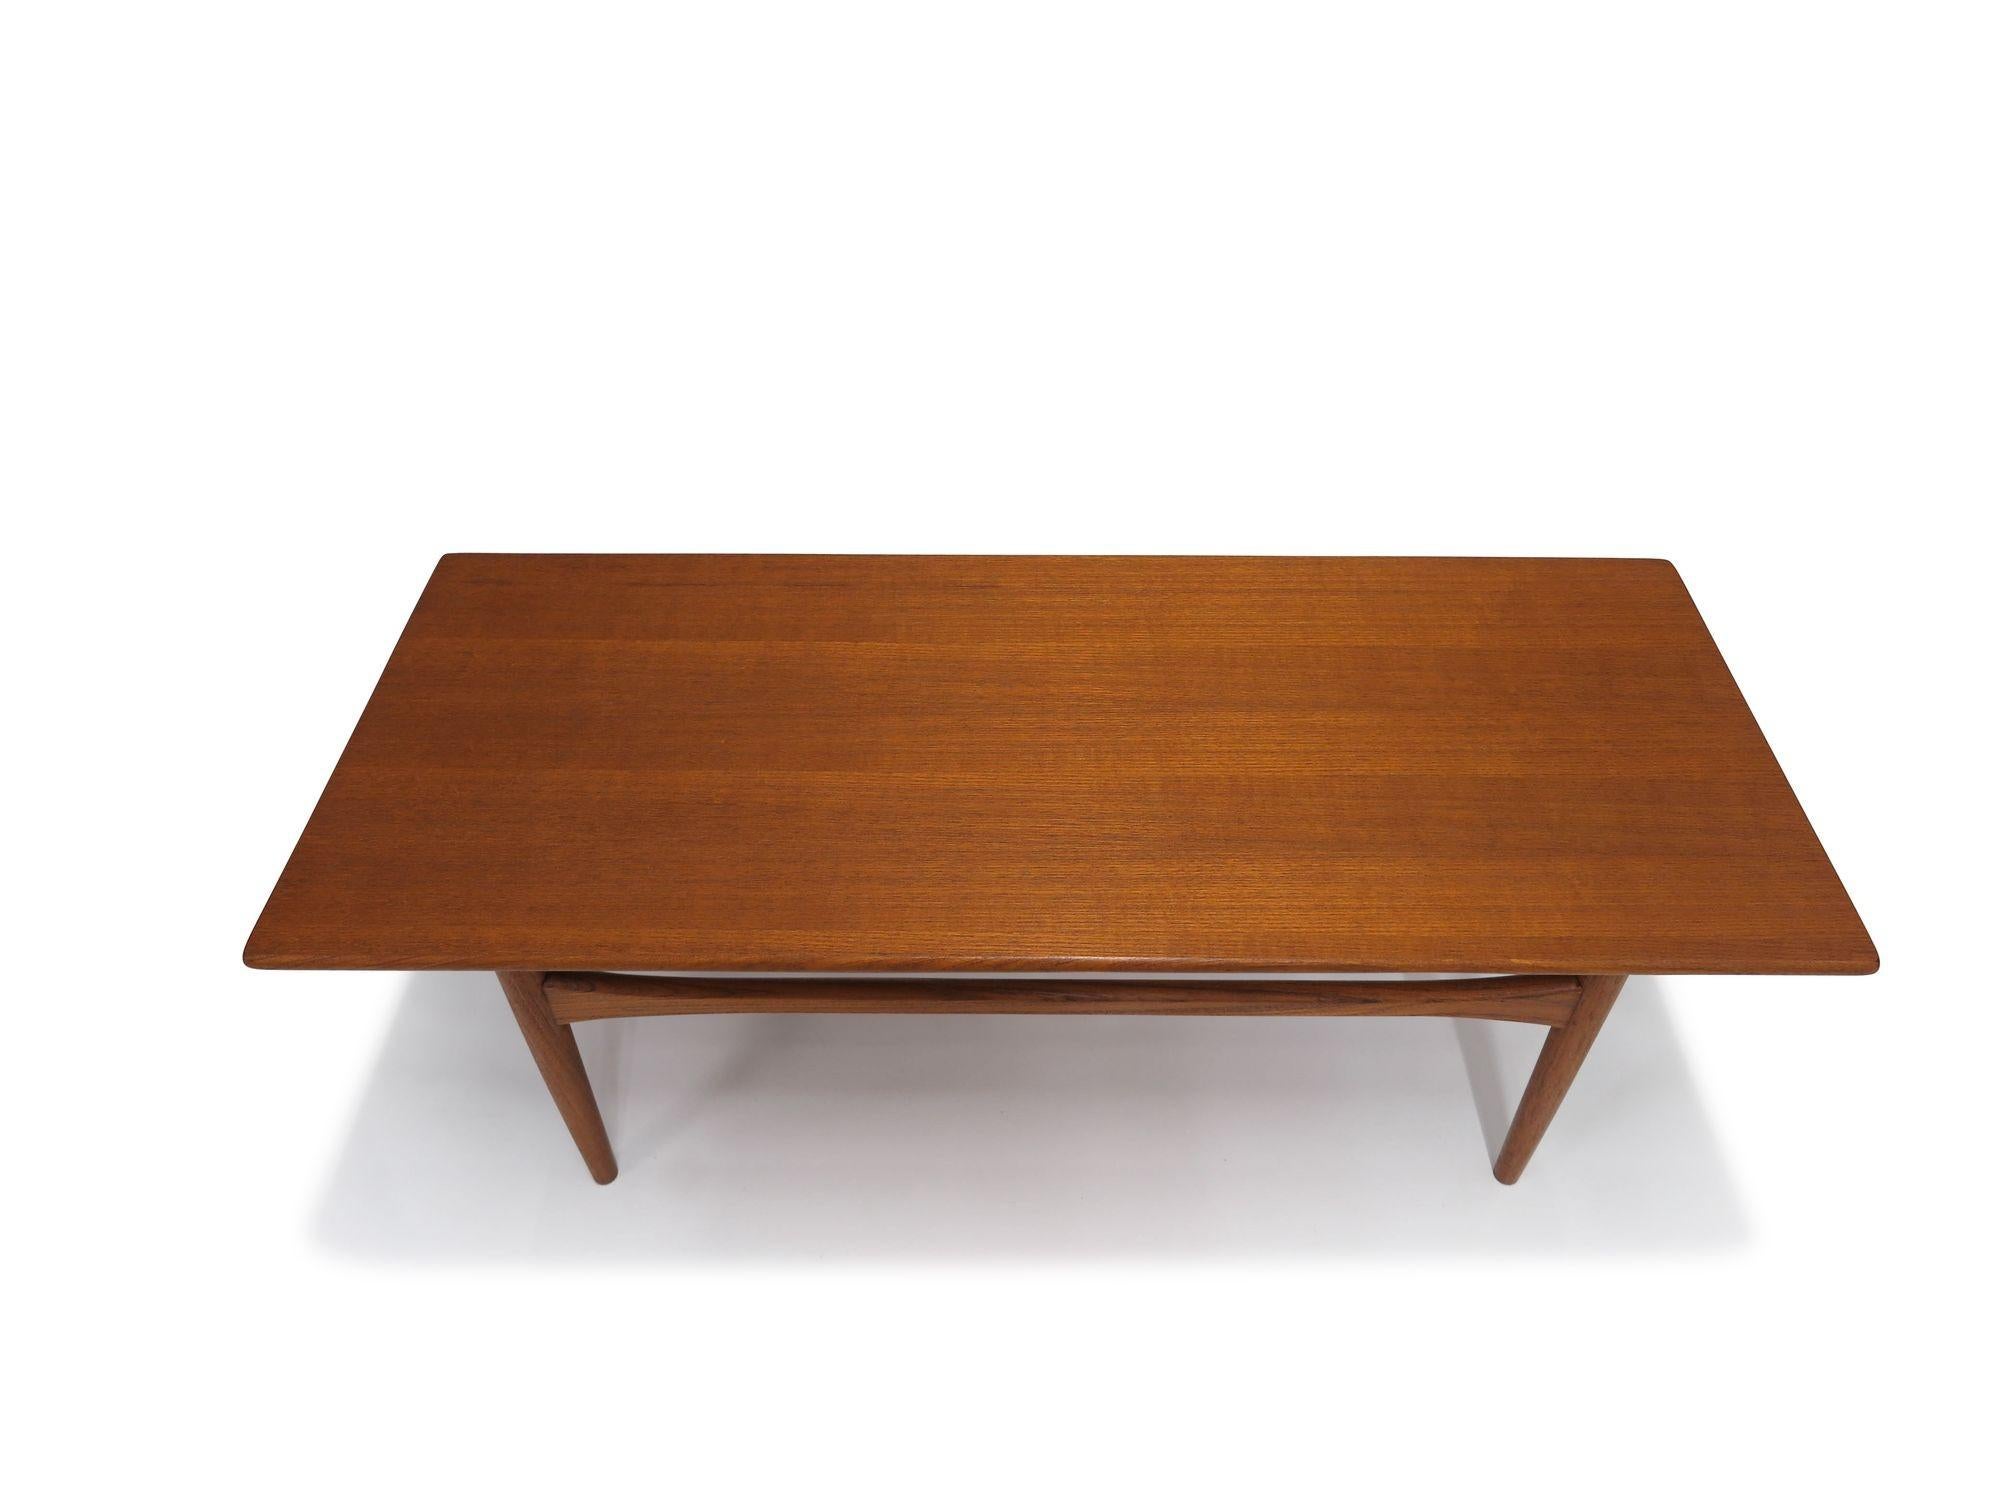 1958 Danish teak coffee table raised on tapered legs with cross stretches.
Measurements
W 48’’ x D 19,75’’ x H 15’’

